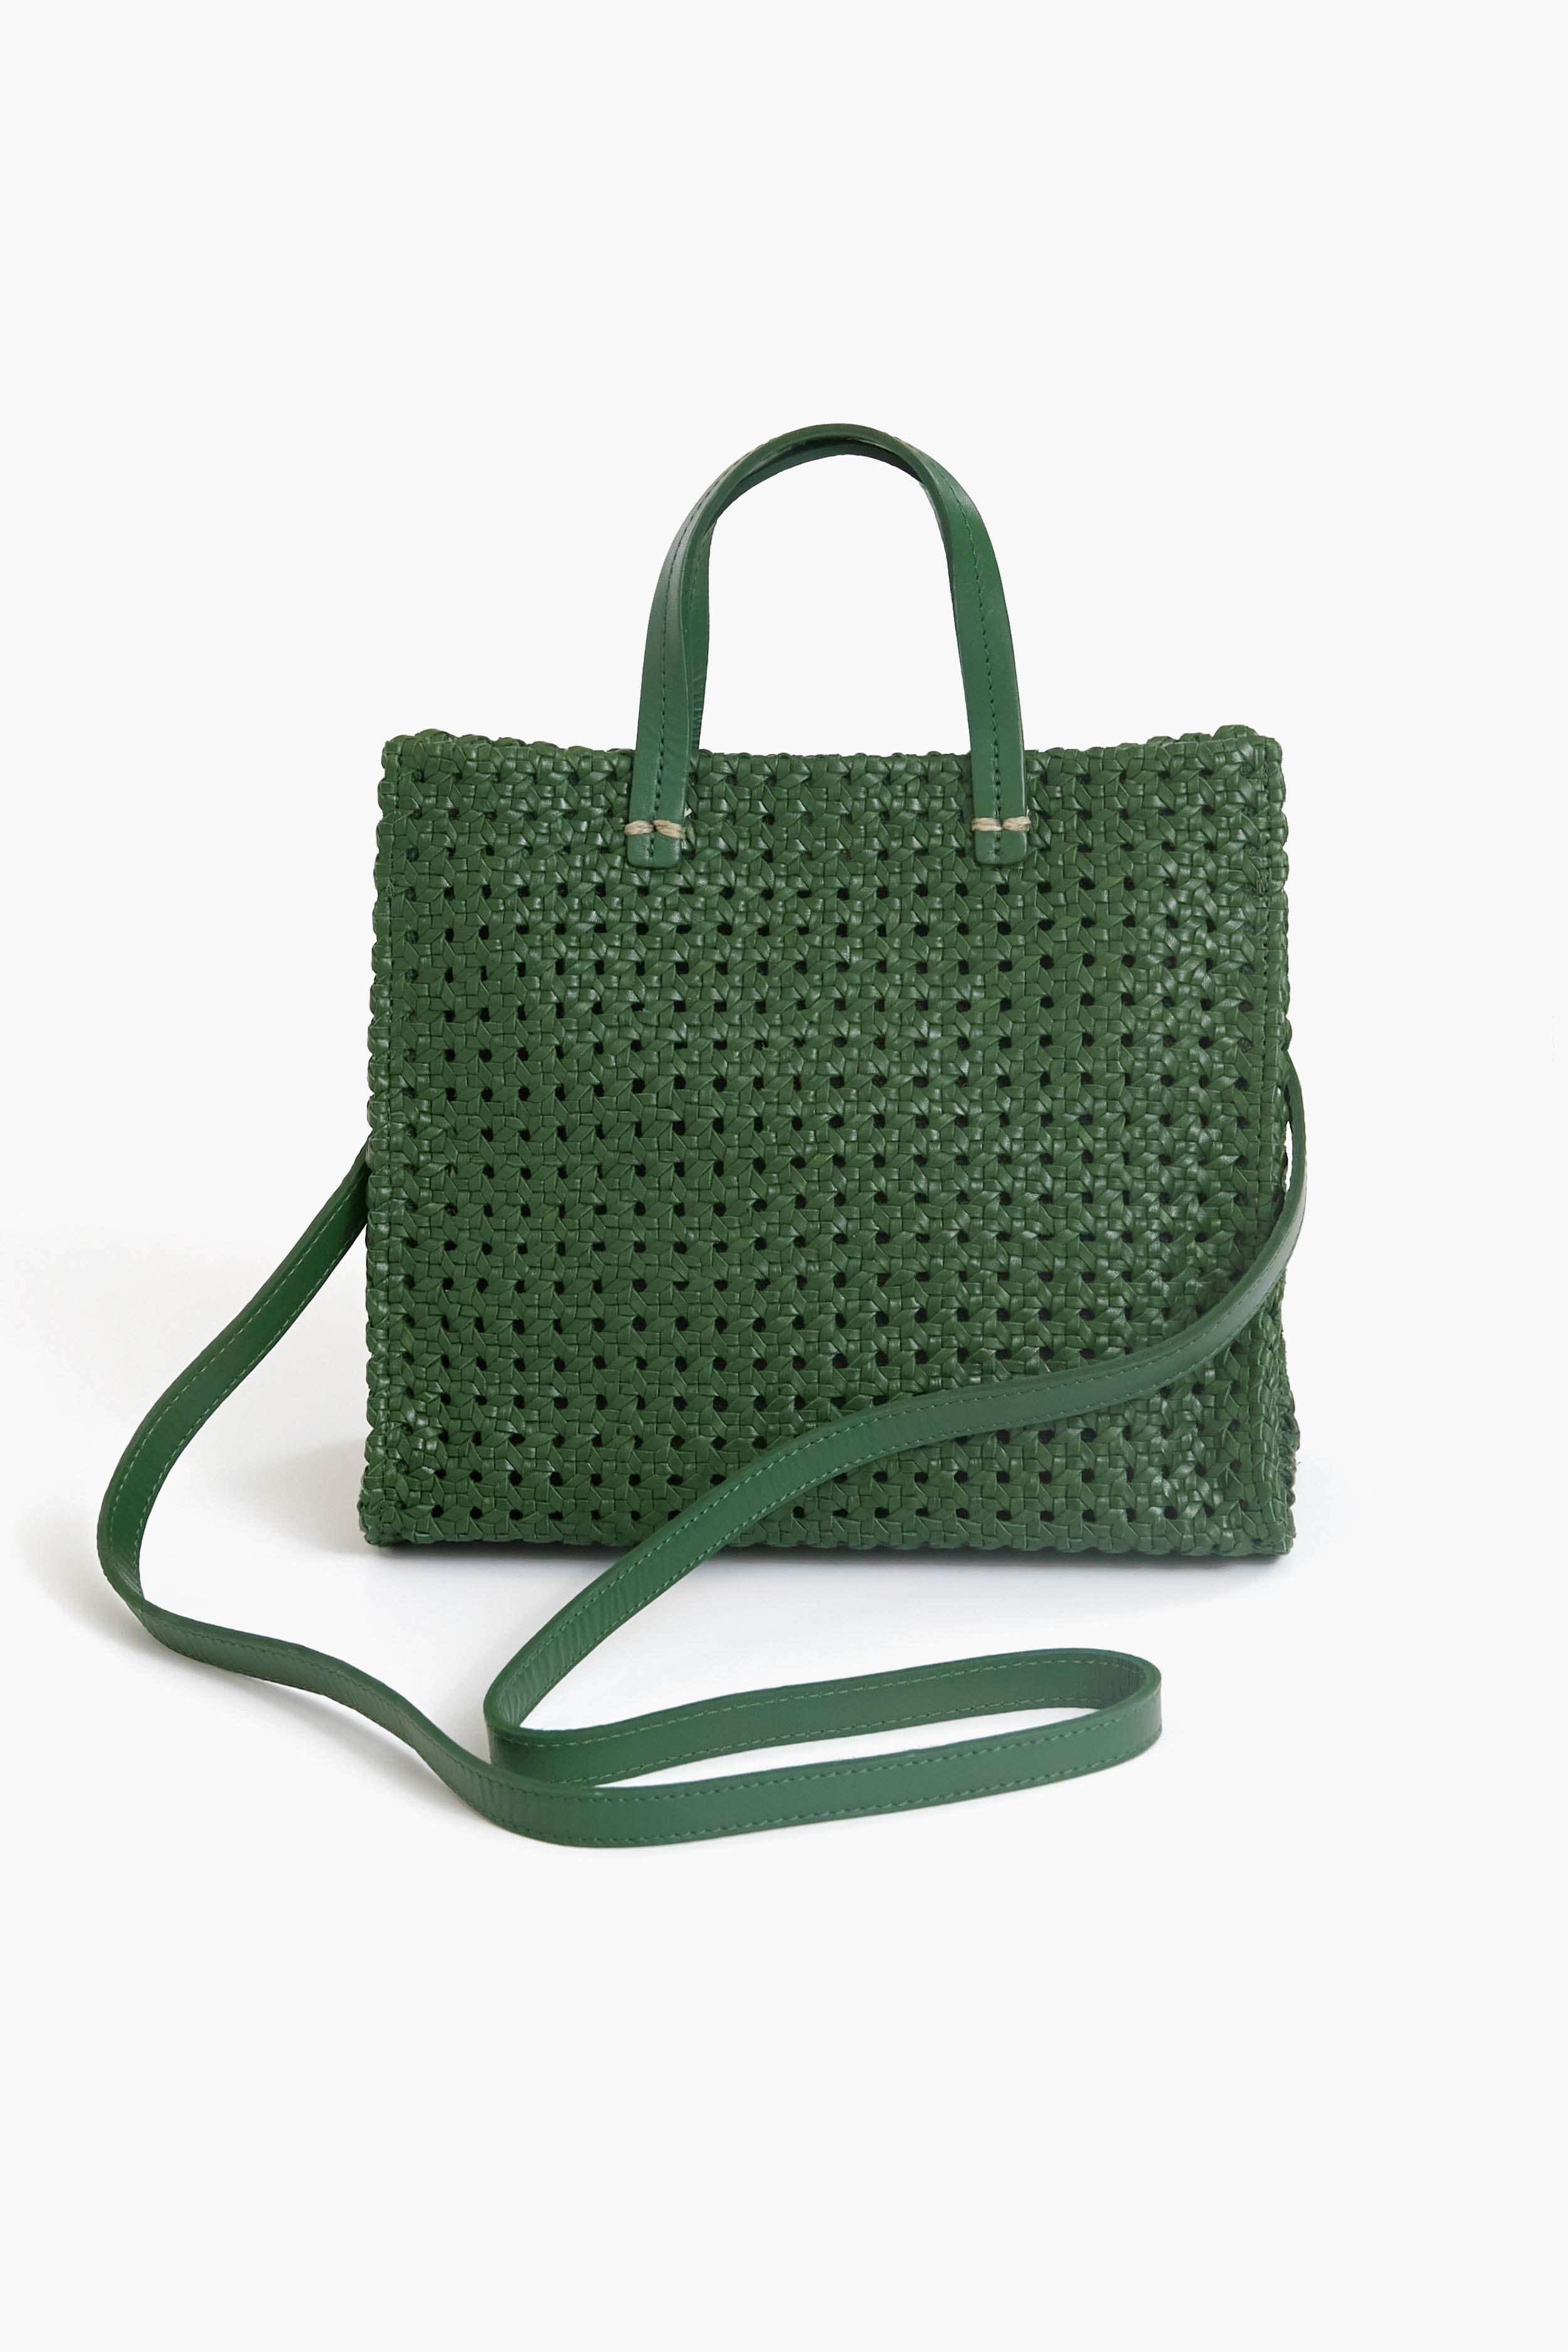 Clare V, Bags, Flash Sale New Clare V Simple Tote Additional Straps